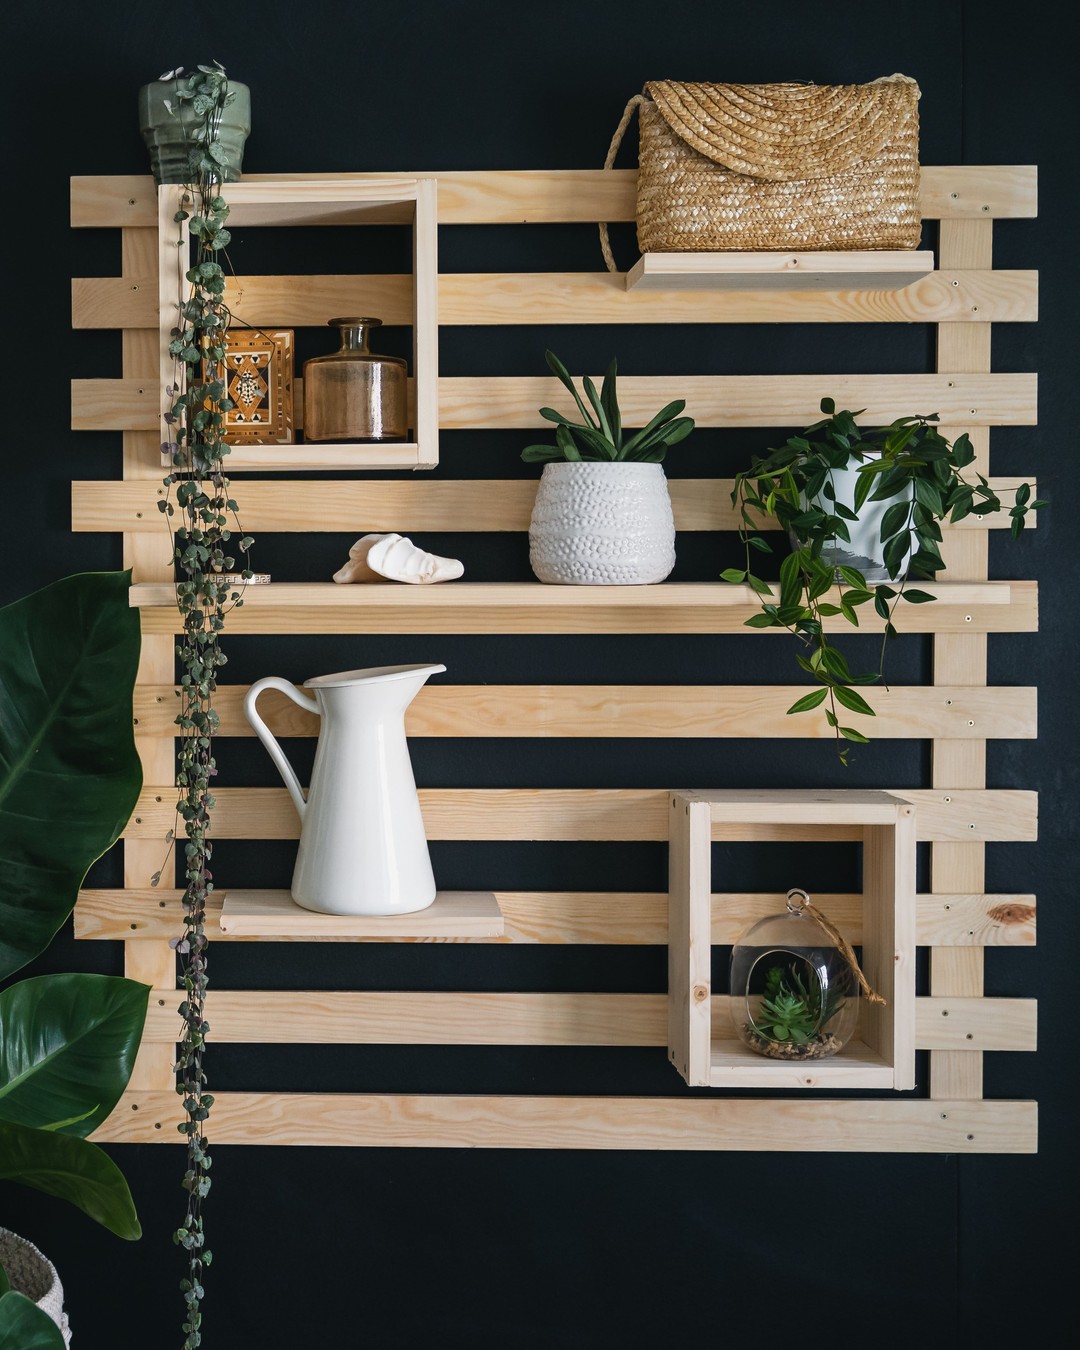 a unique wooden shelf is a clever and efficient way to use a wall as decorative display of personal and cherished items.